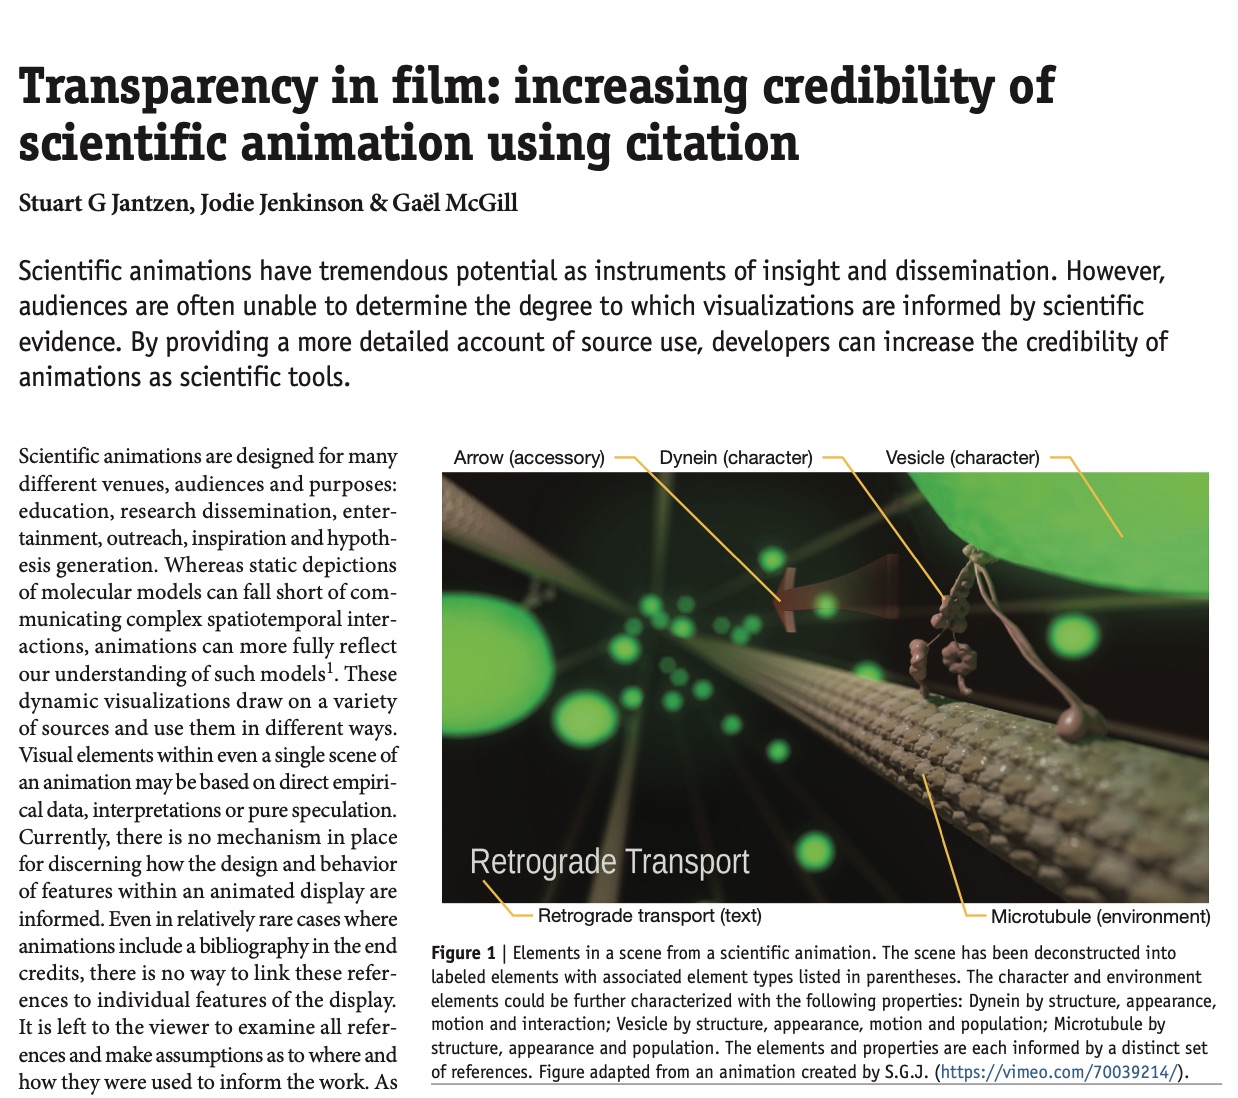 Article in Nature giving examples of how you can increase transparency in scientific animation